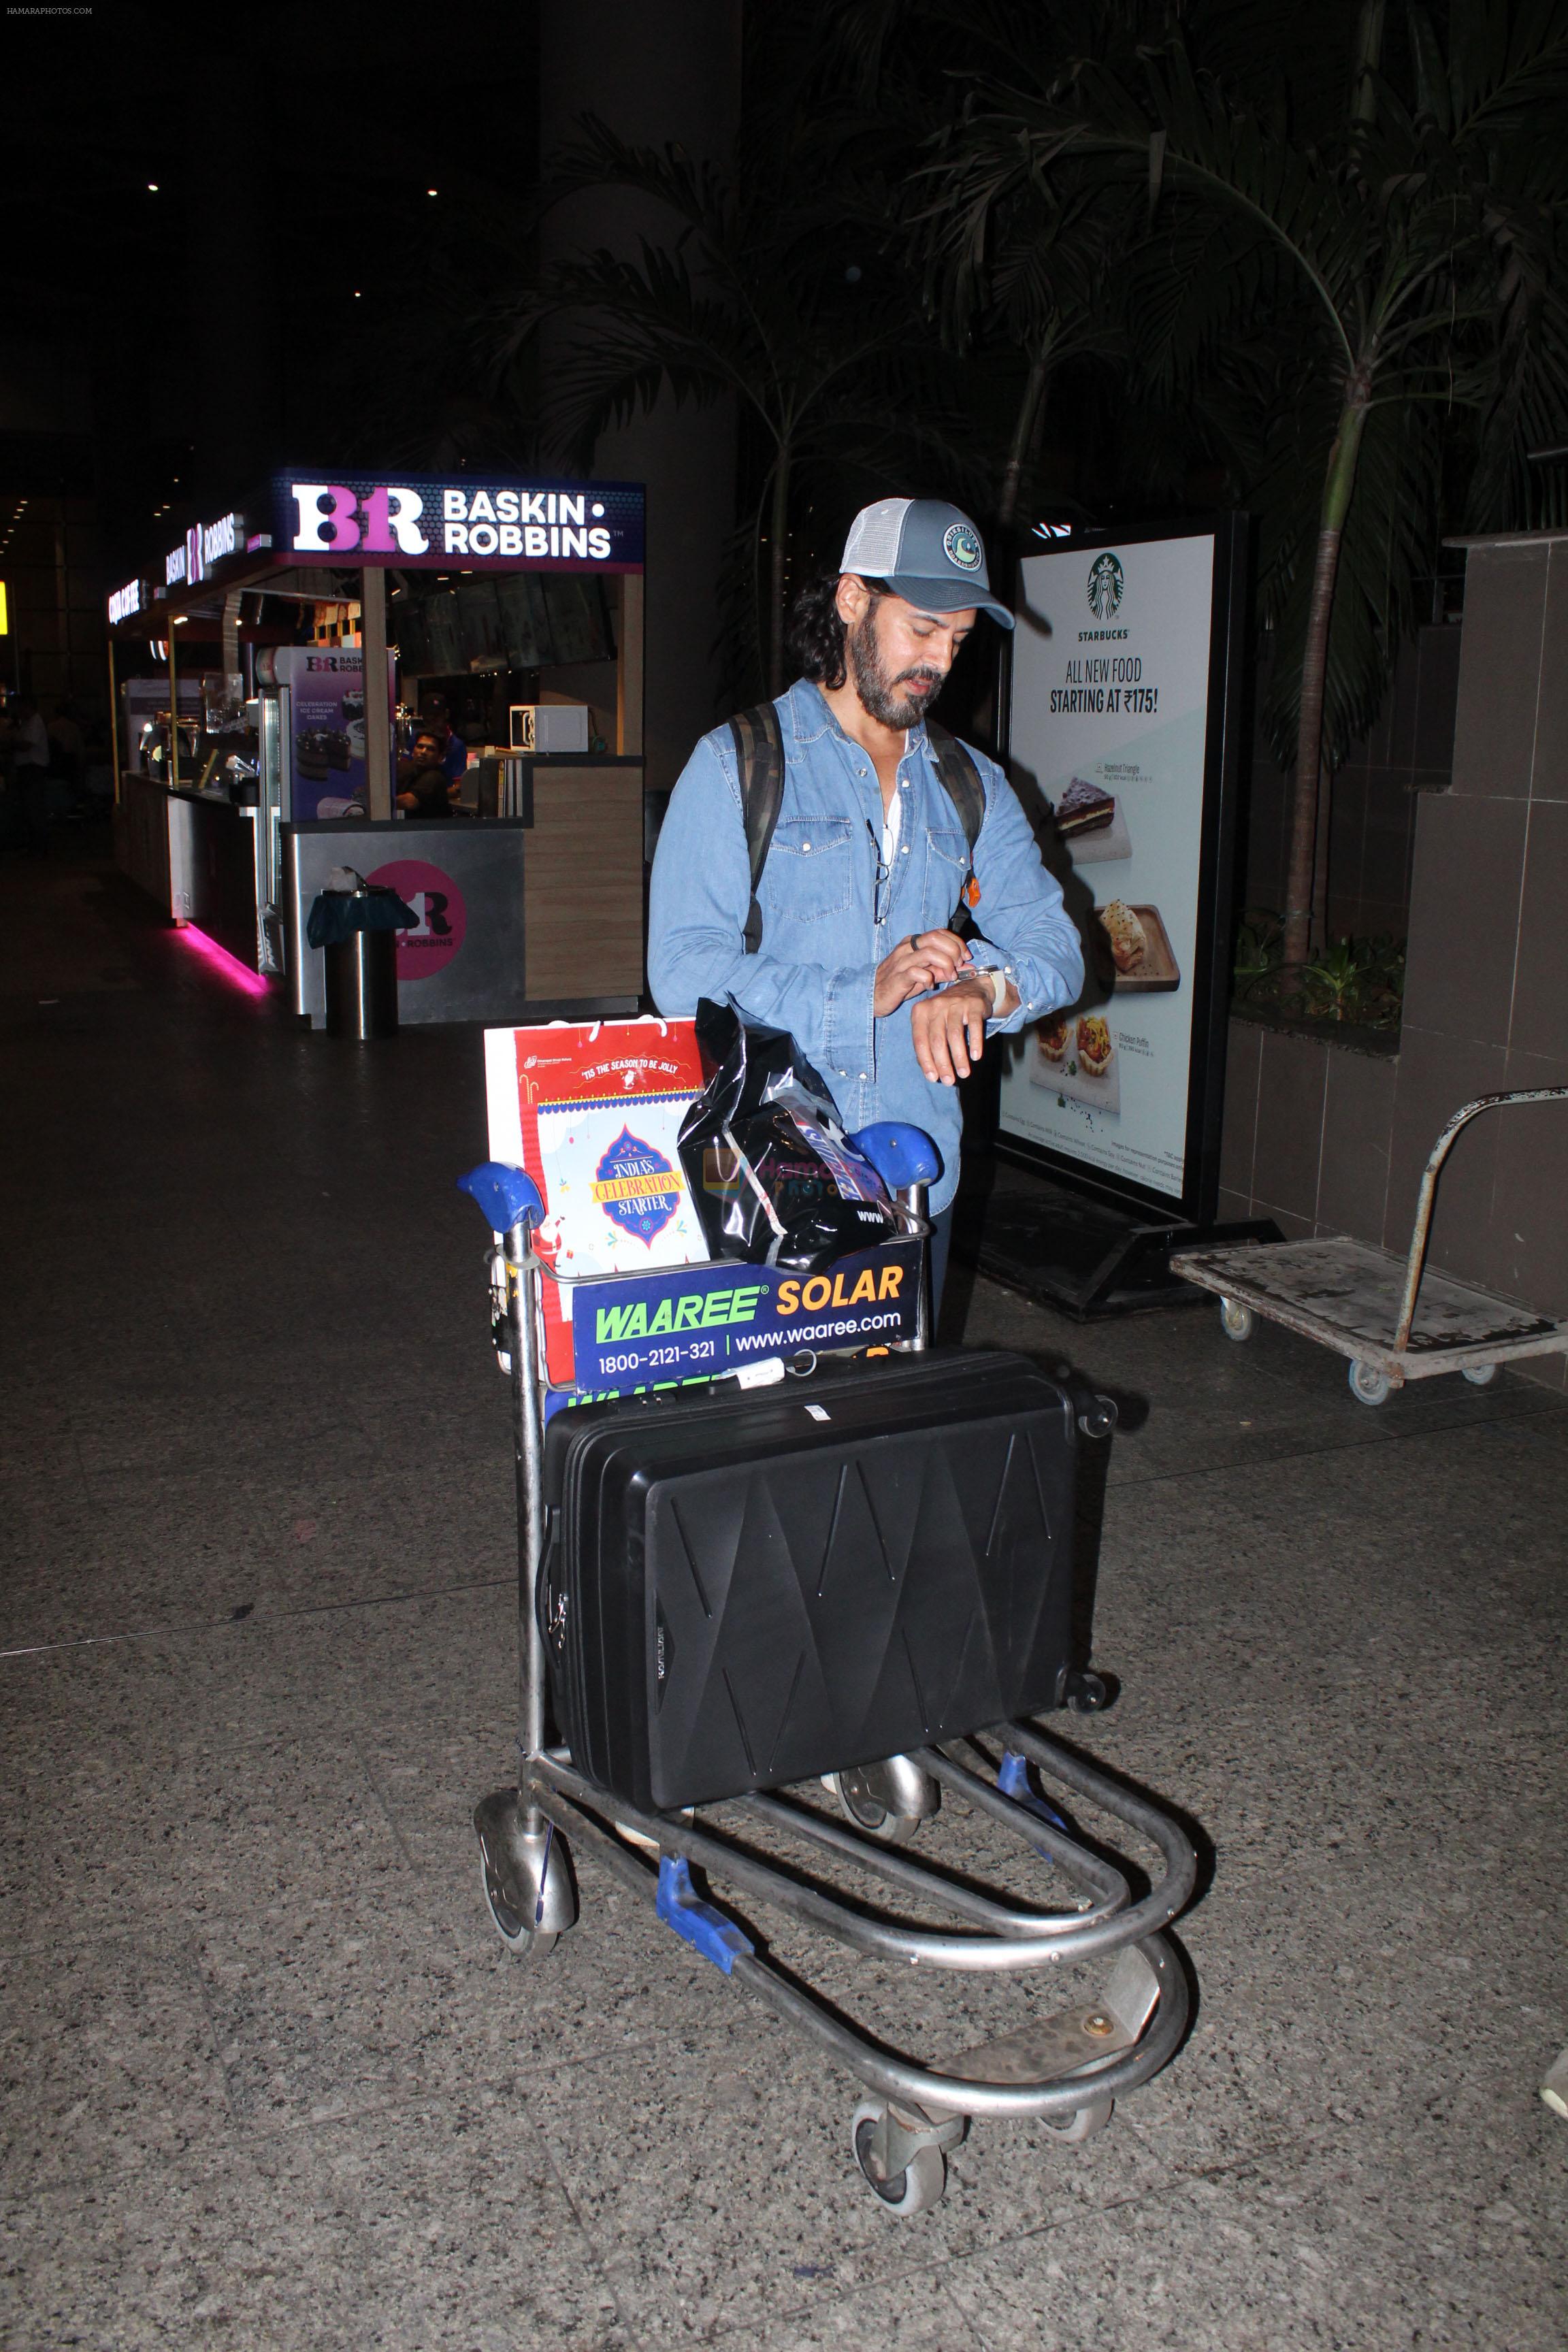 Dino Morea dressed in a jeans shirt and sweat pant with gray hat spotted at airport on 13 Jun 2023